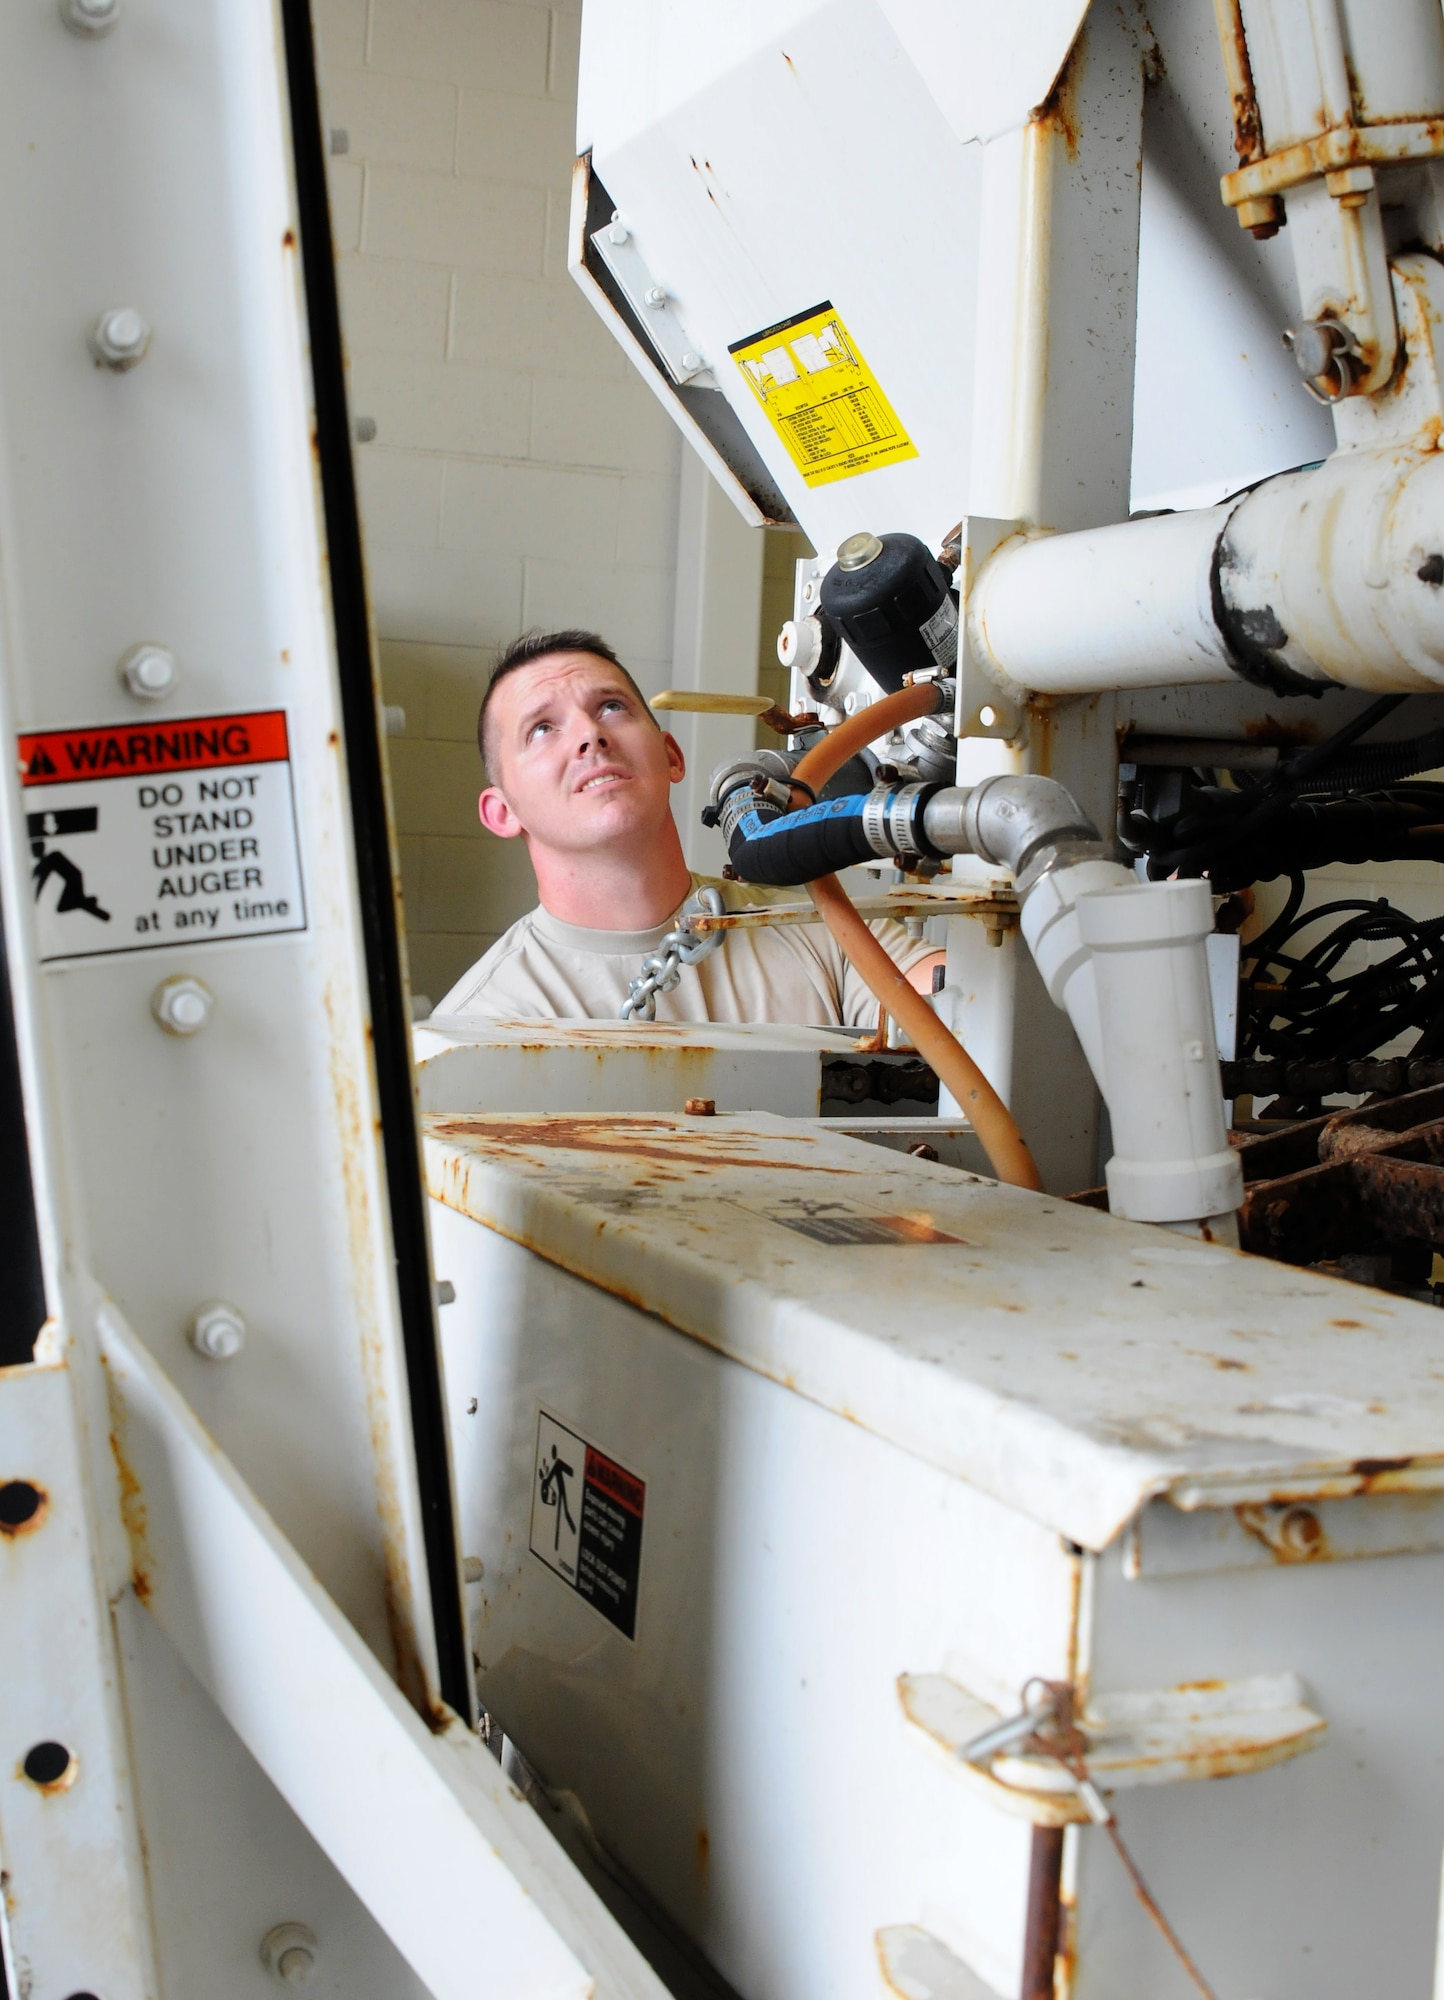 Tech. Sgt. Christopher Corbit, vehicle mechanic, operates on a Zim mixer Oct. 7, 2015, at Ebbing Air National Guard Base, Fort Smith, Ark.  Airmen within Vehicle Maintenance handle all maintenance concerns for registered vehicles and technical support for ex-registered vehicles. (U.S. Air National Guard photo by Senior Airman Cody Martin/Released)